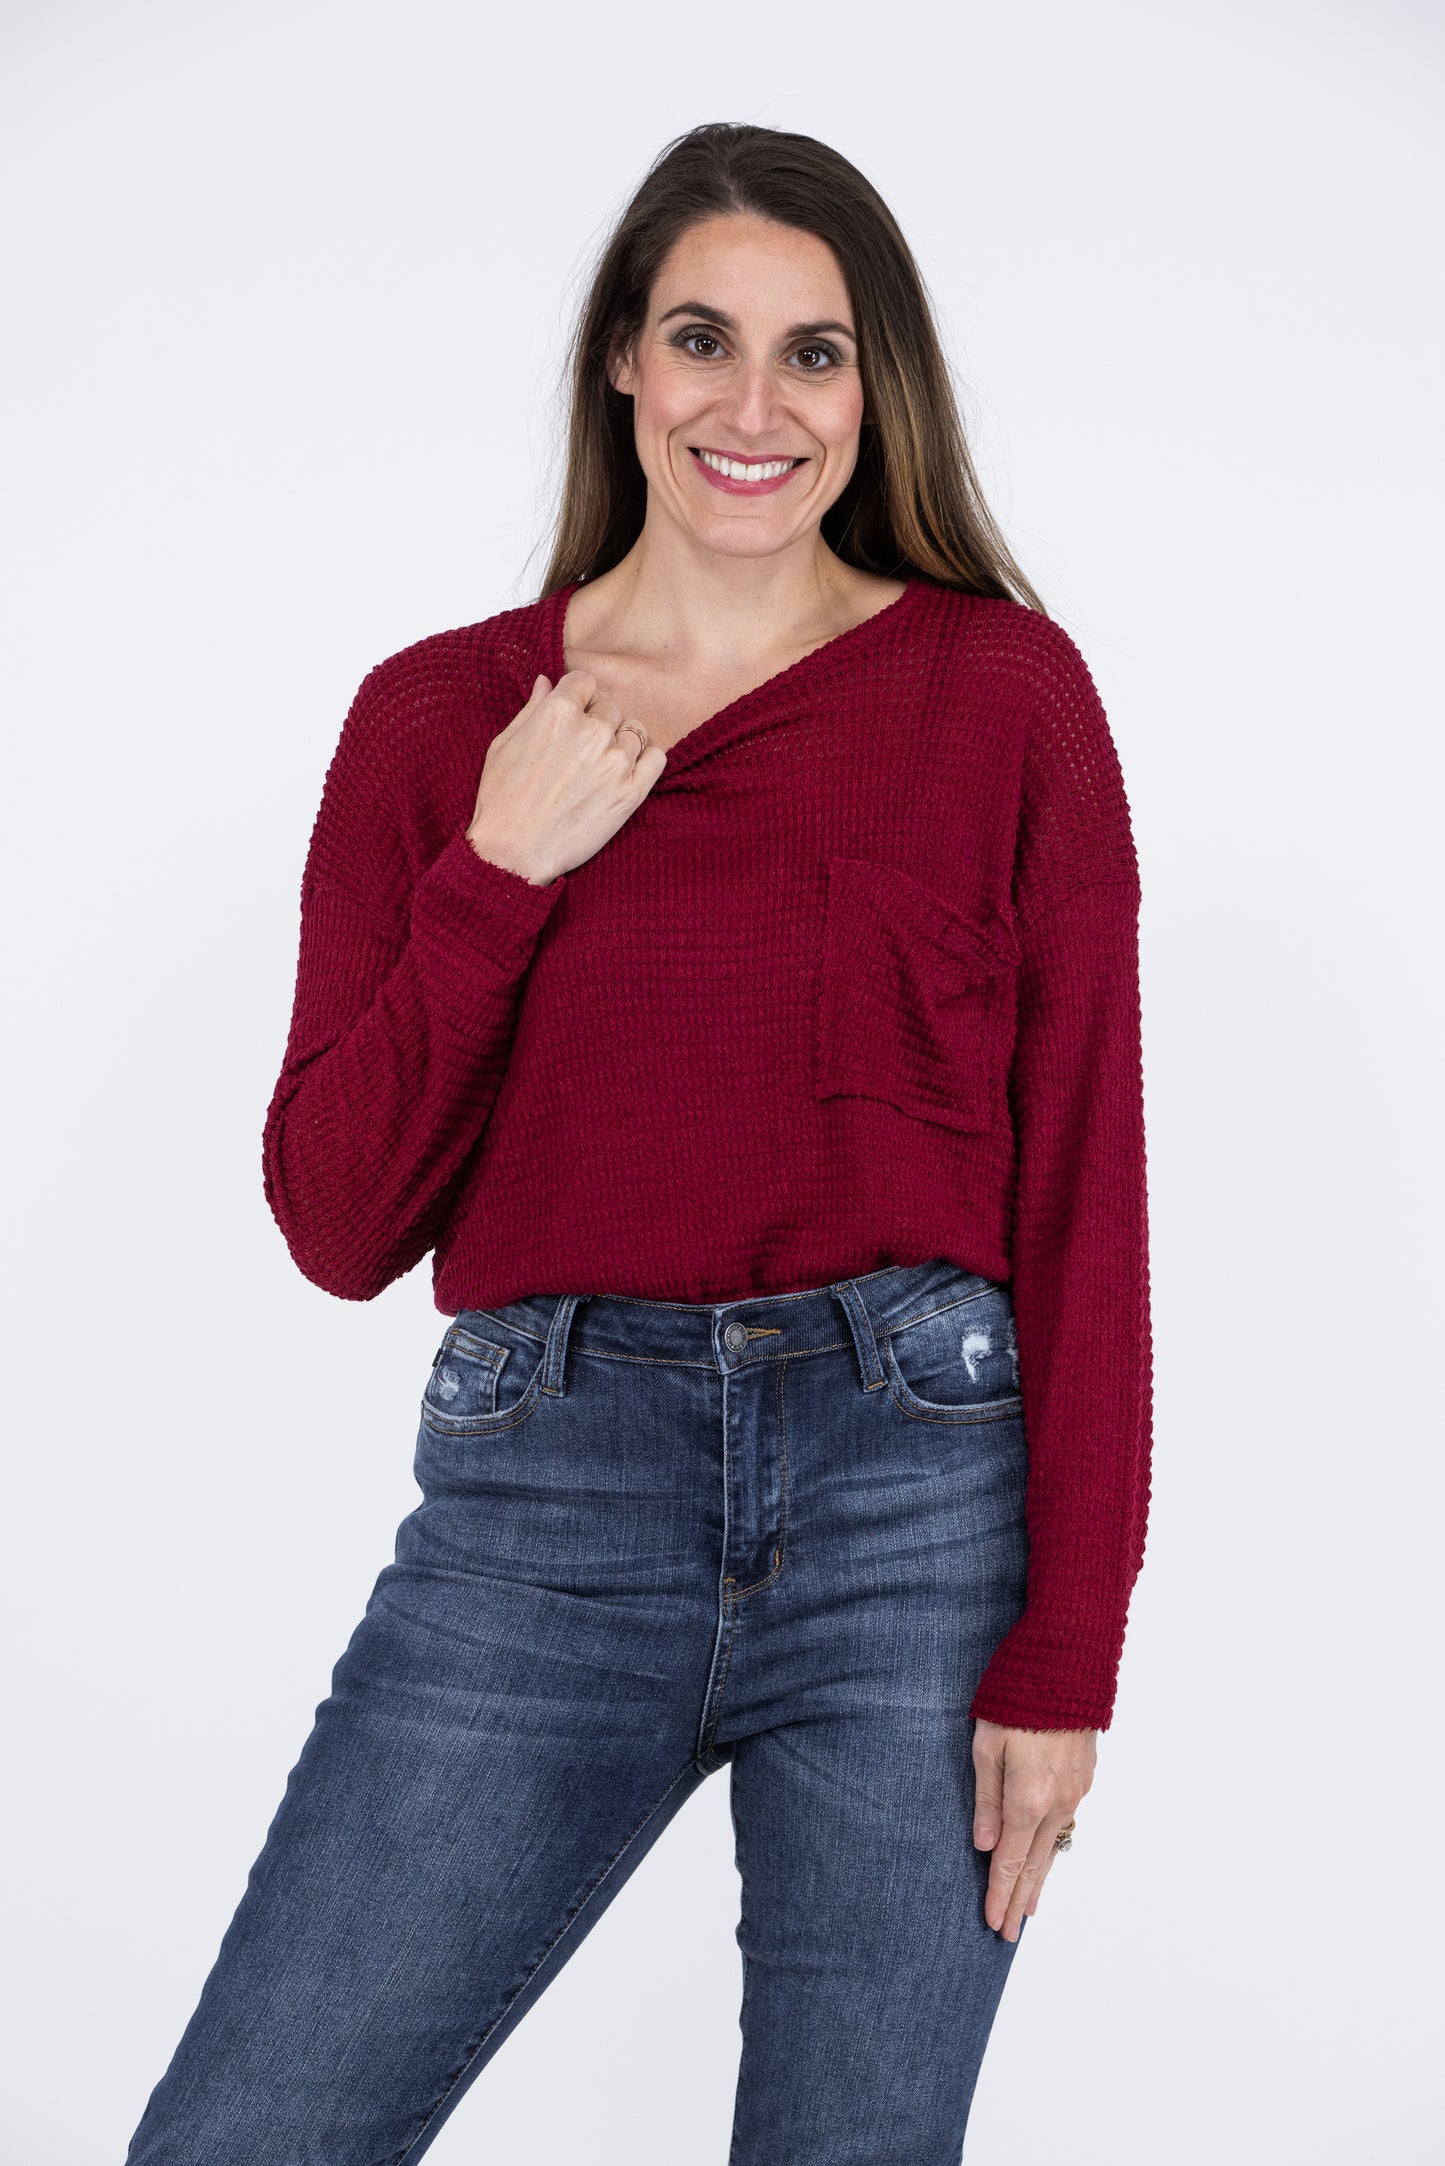 Find Serenity Long Sleeve Top